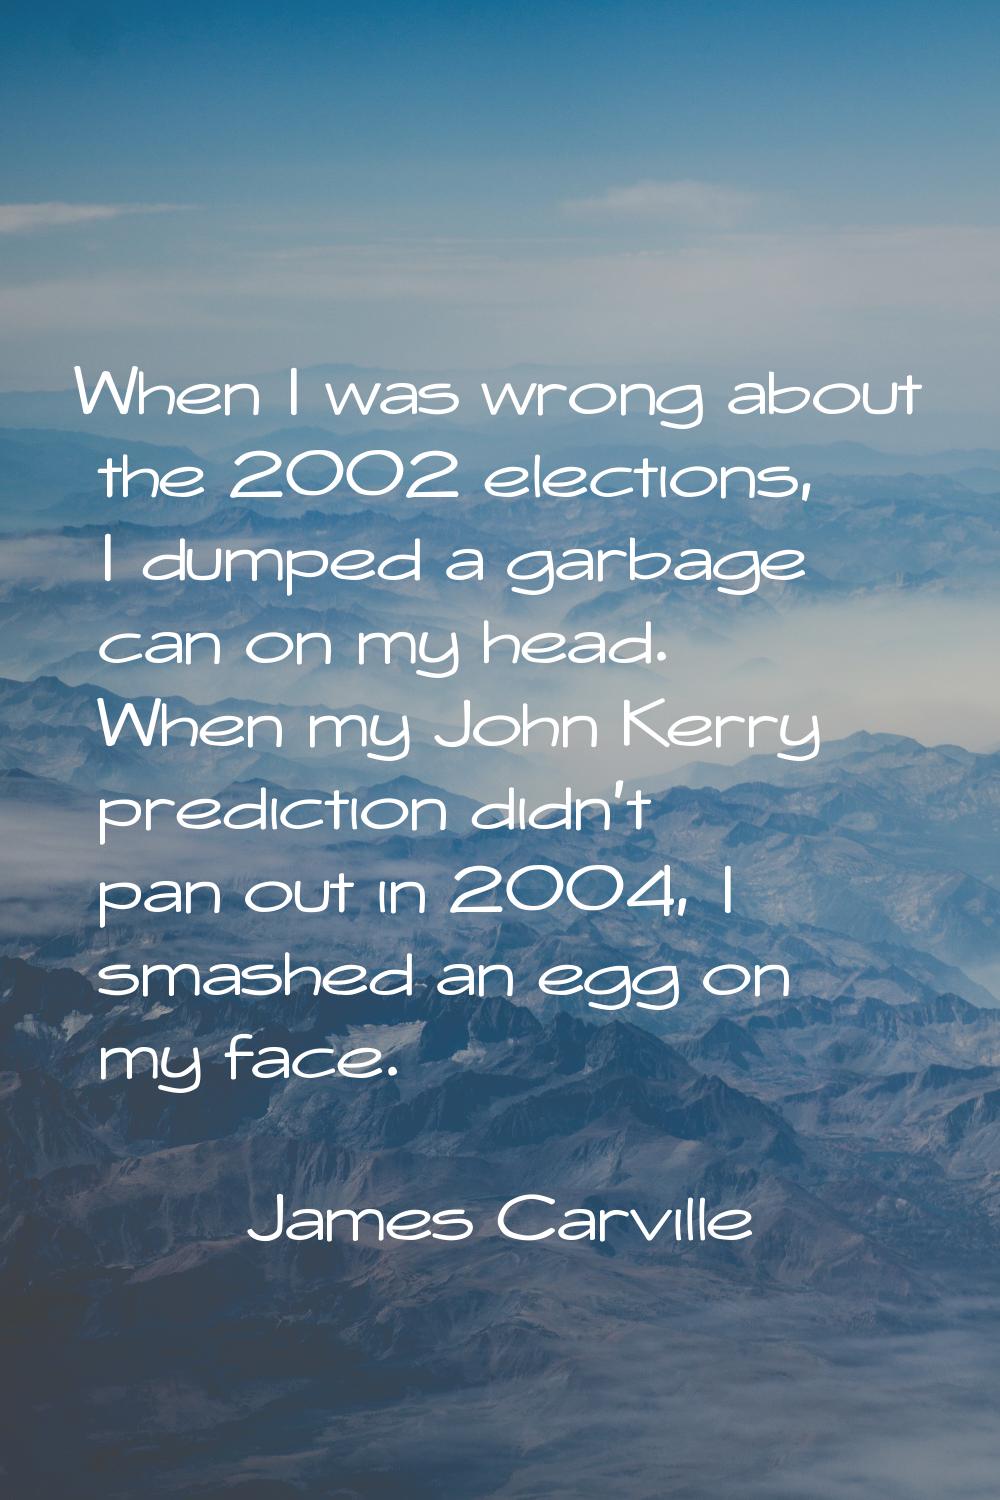 When I was wrong about the 2002 elections, I dumped a garbage can on my head. When my John Kerry pr